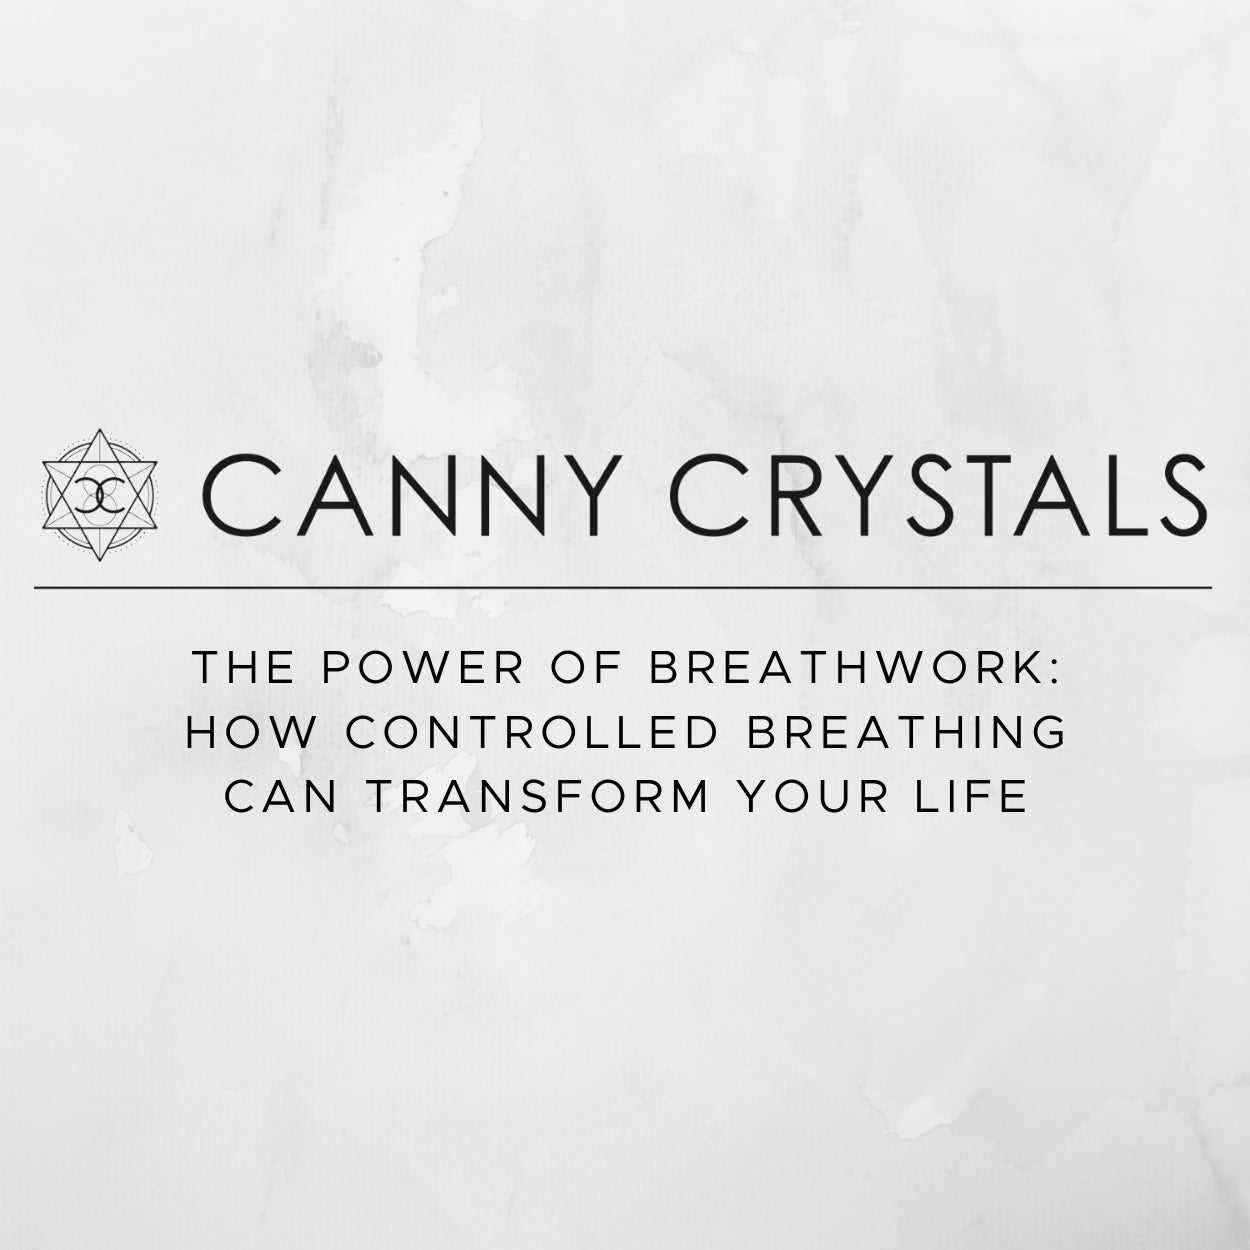 The Power of Breathwork: How Controlled Breathing Can Transform Your Life